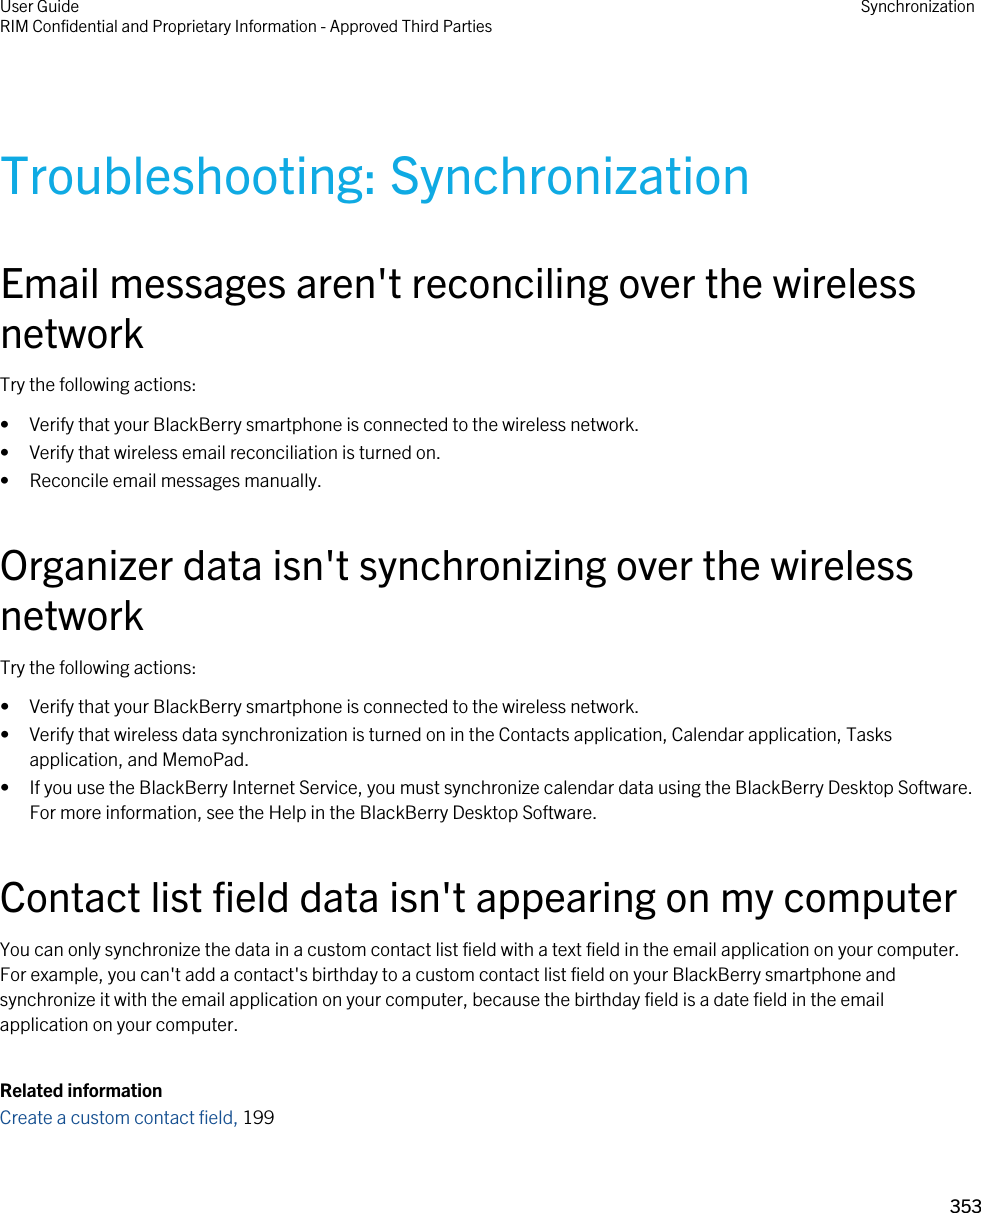 Troubleshooting: SynchronizationEmail messages aren&apos;t reconciling over the wireless networkTry the following actions:• Verify that your BlackBerry smartphone is connected to the wireless network.• Verify that wireless email reconciliation is turned on.• Reconcile email messages manually.Organizer data isn&apos;t synchronizing over the wireless networkTry the following actions:• Verify that your BlackBerry smartphone is connected to the wireless network.• Verify that wireless data synchronization is turned on in the Contacts application, Calendar application, Tasks application, and MemoPad.• If you use the BlackBerry Internet Service, you must synchronize calendar data using the BlackBerry Desktop Software. For more information, see the Help in the BlackBerry Desktop Software.Contact list field data isn&apos;t appearing on my computerYou can only synchronize the data in a custom contact list field with a text field in the email application on your computer. For example, you can&apos;t add a contact&apos;s birthday to a custom contact list field on your BlackBerry smartphone and synchronize it with the email application on your computer, because the birthday field is a date field in the email application on your computer.Related informationCreate a custom contact field, 199 User GuideRIM Confidential and Proprietary Information - Approved Third Parties Synchronization353 